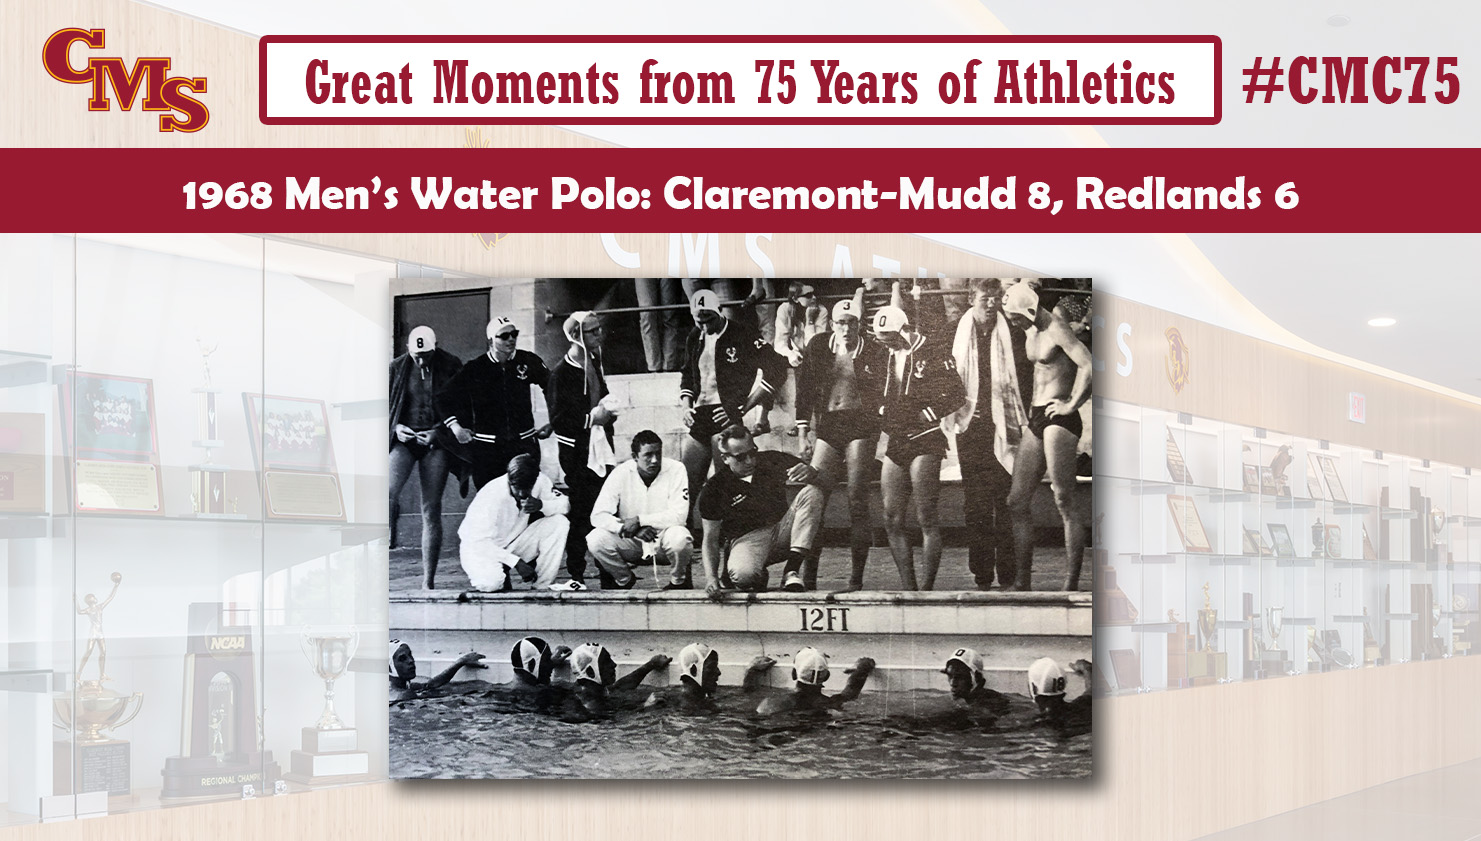 The 1968 men's water polo team huddling on the sidelines. Words over the text read: Great Moments from 75 Years of Athletics, 1968 Men's Water Polo: Claremont-Mudd 8, Redlands 6